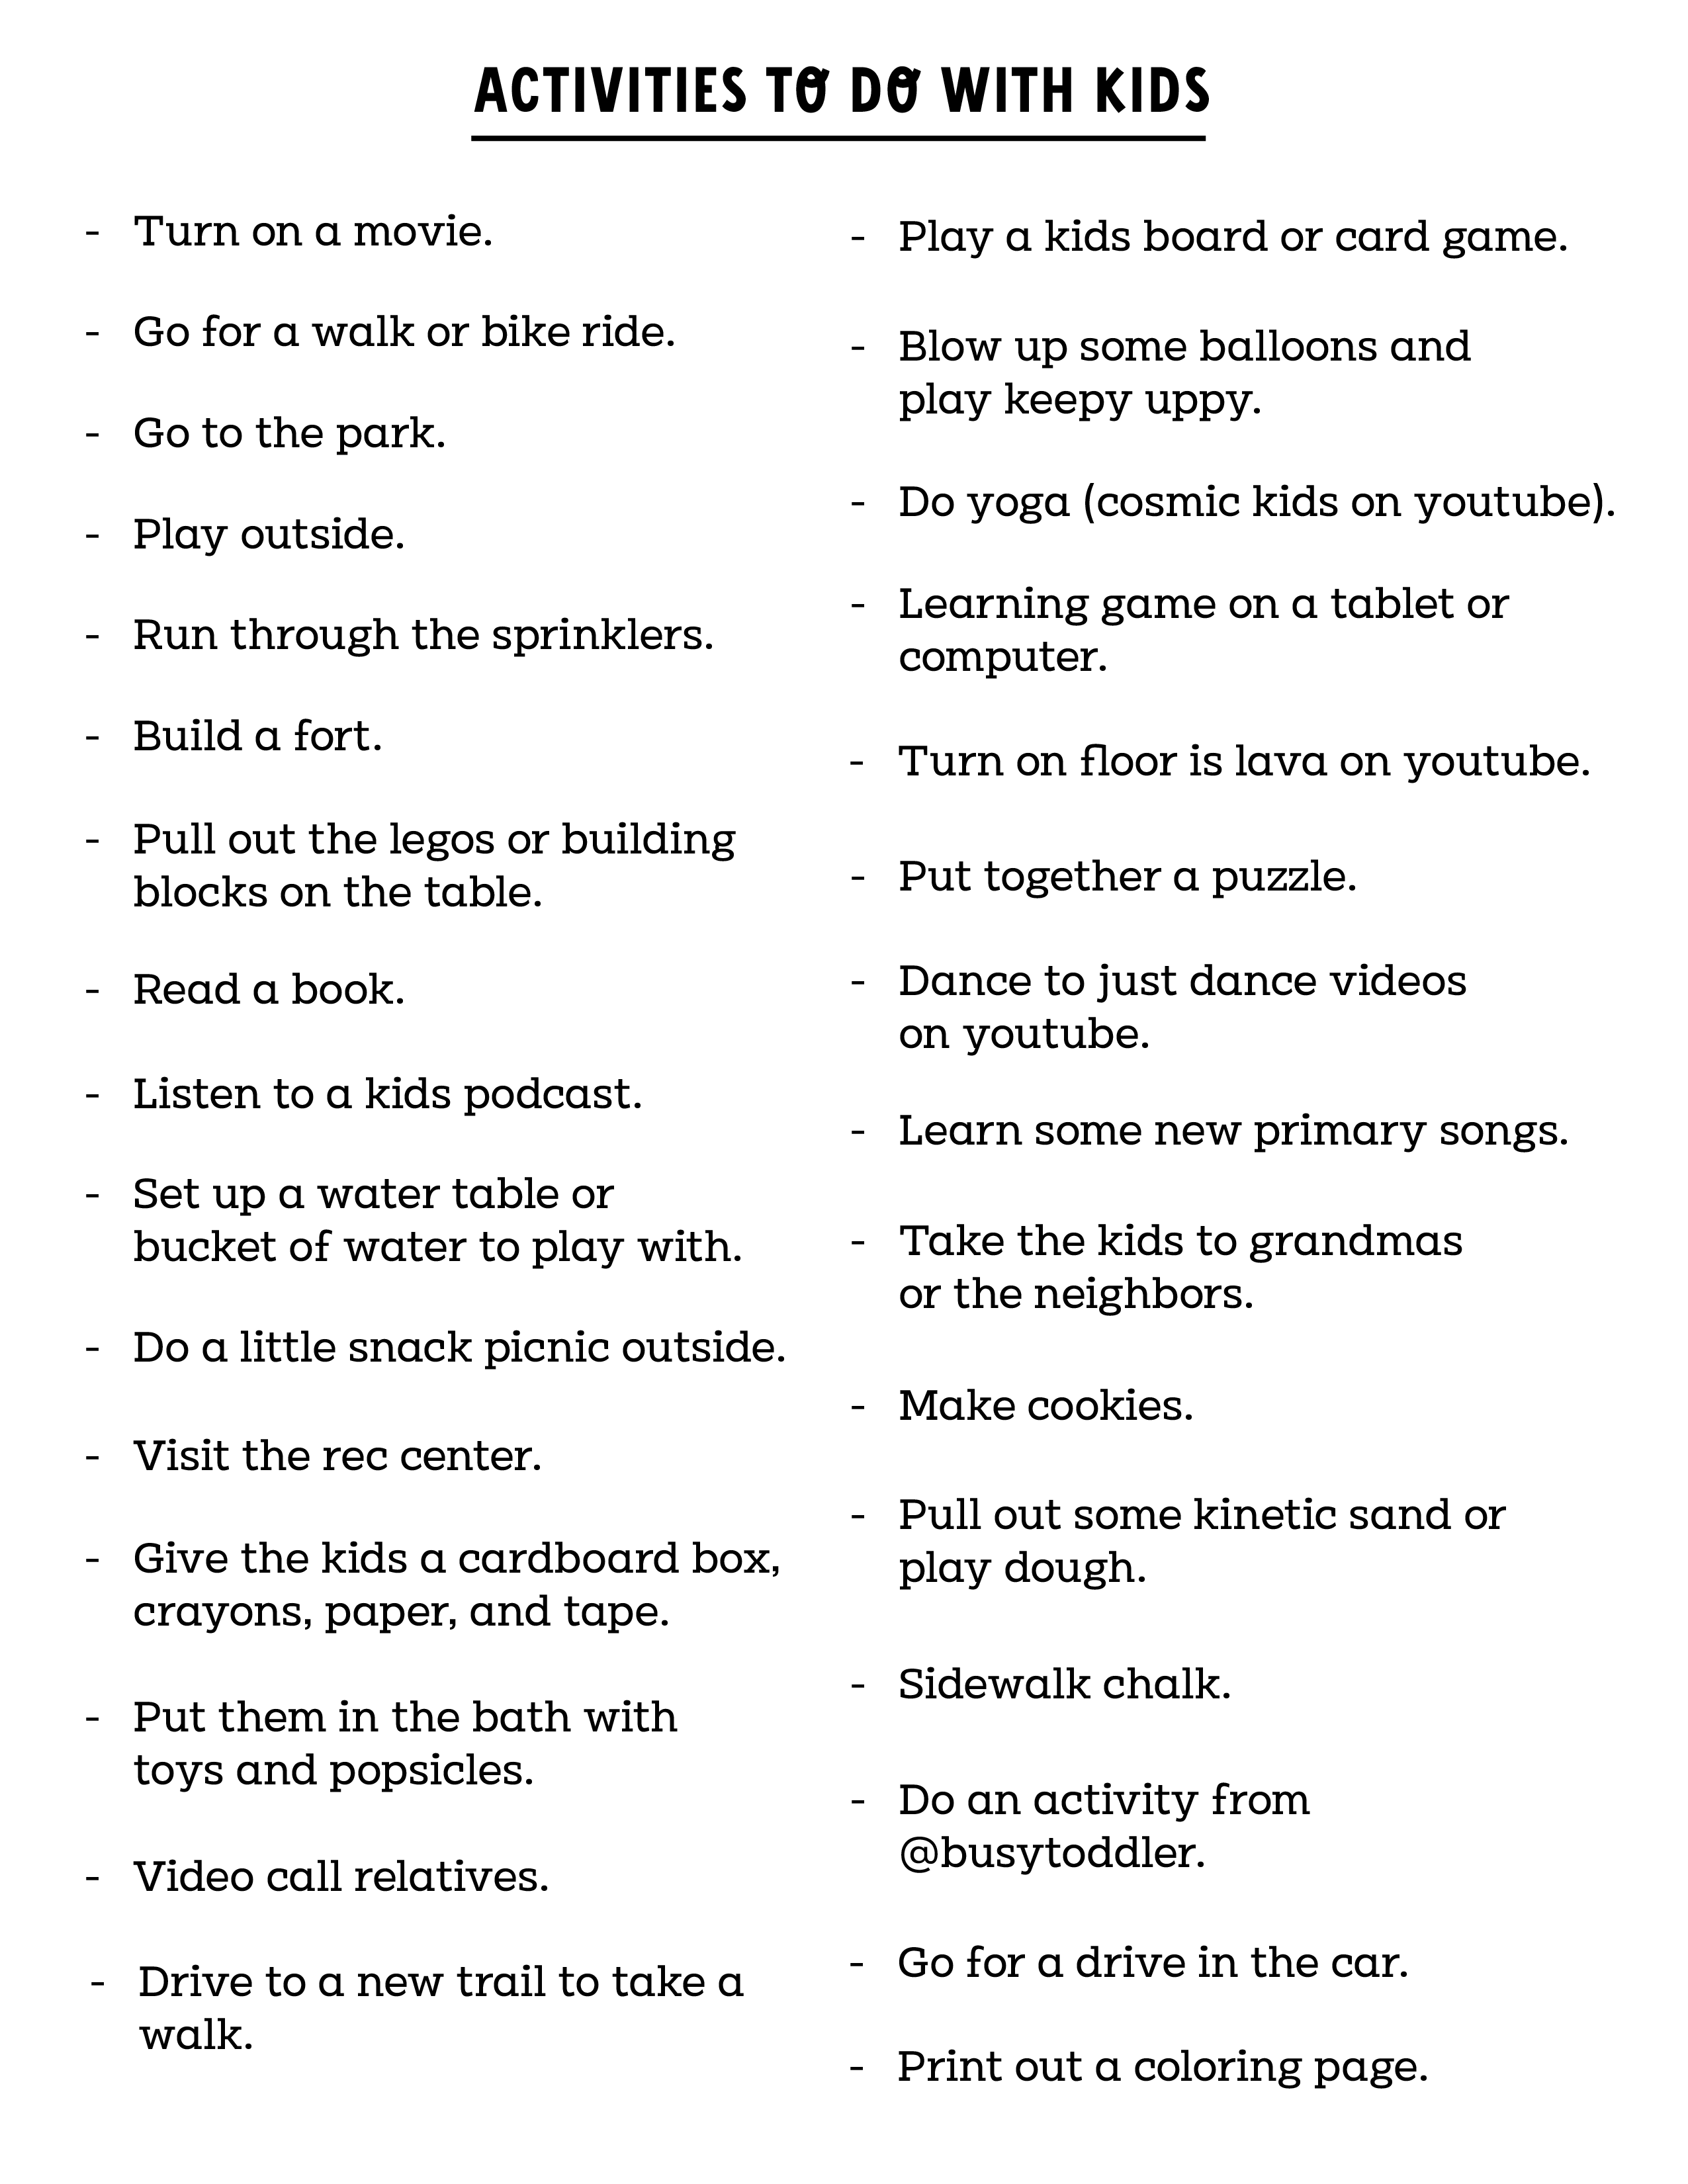 Activities to do With Kids